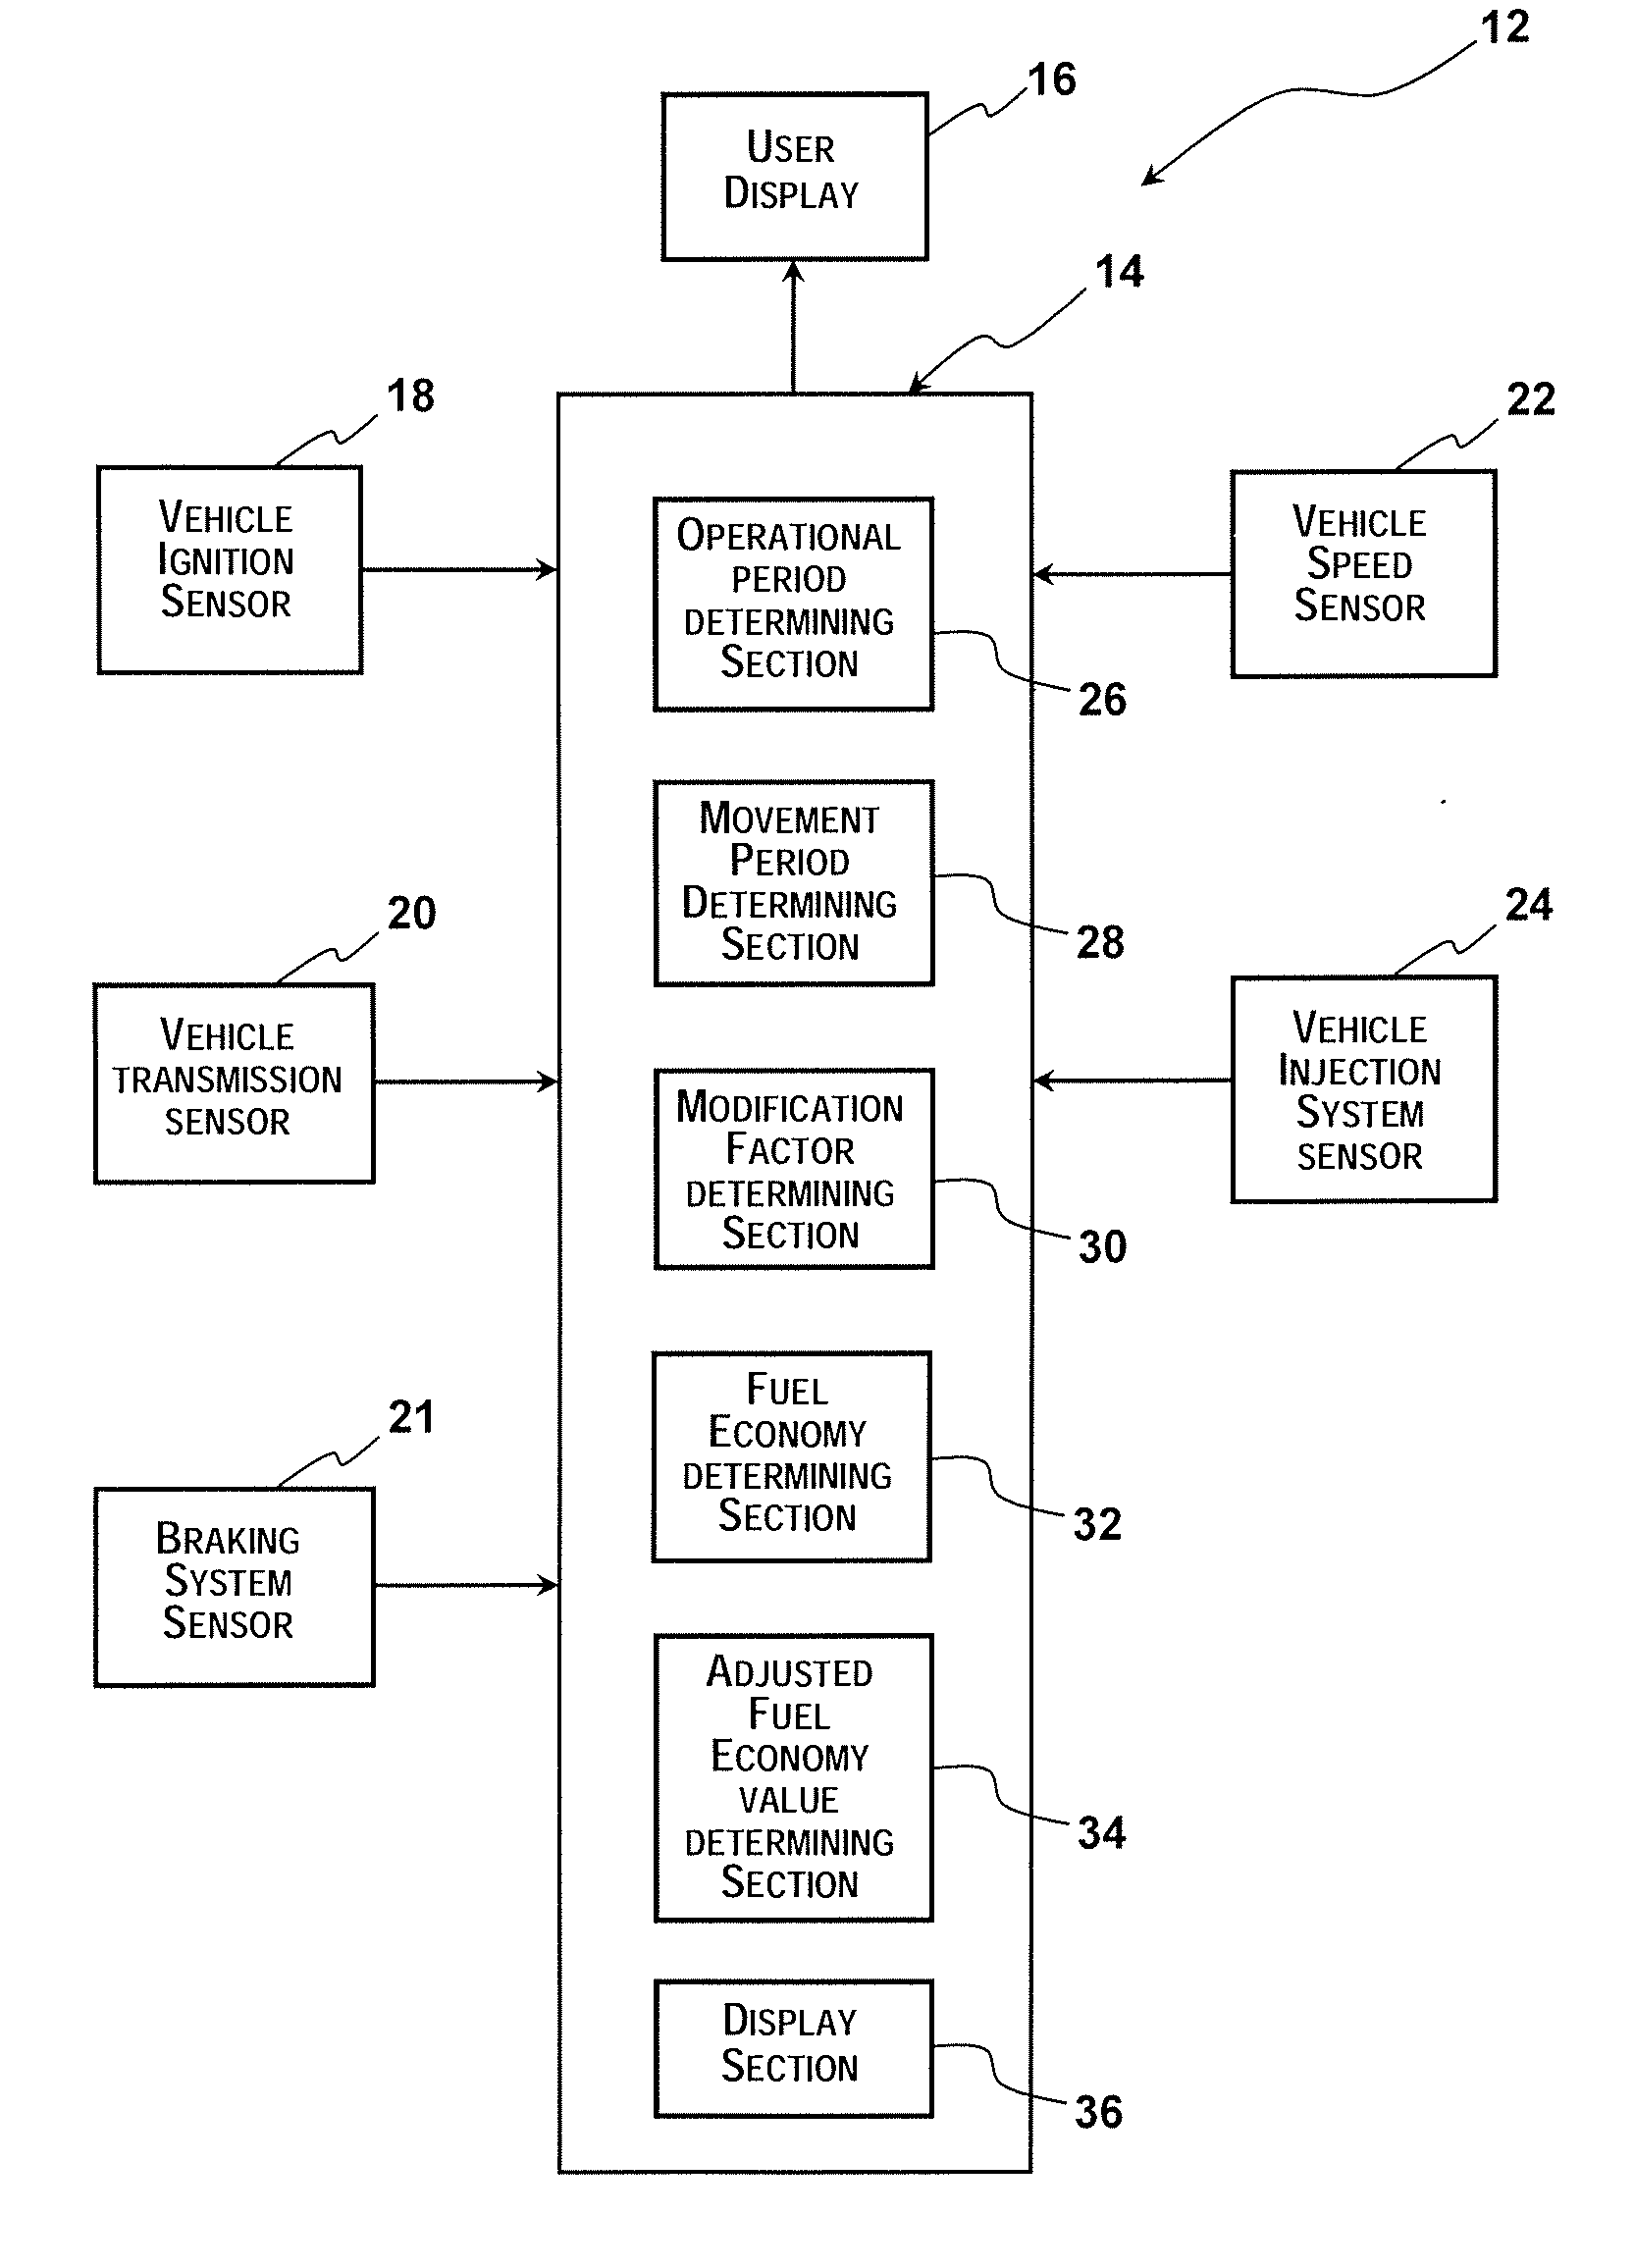 Vehicle information system